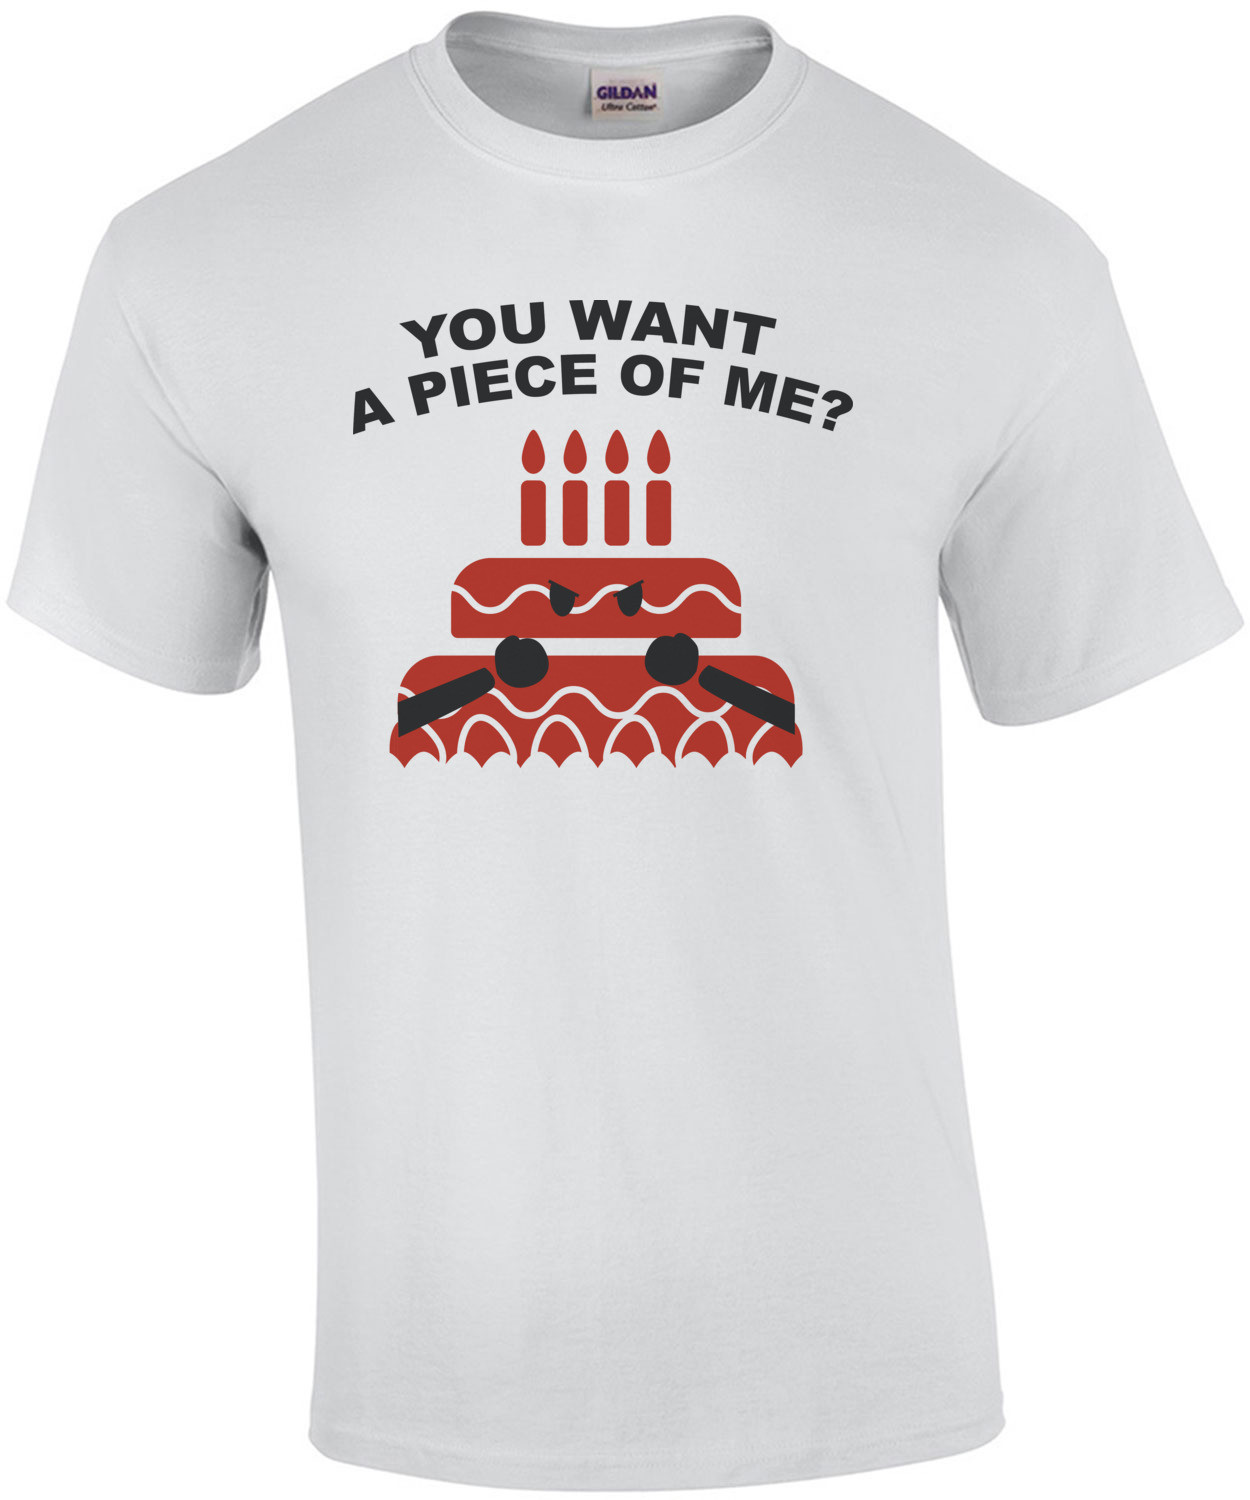 You want a piece of me? Cake T-Shirt